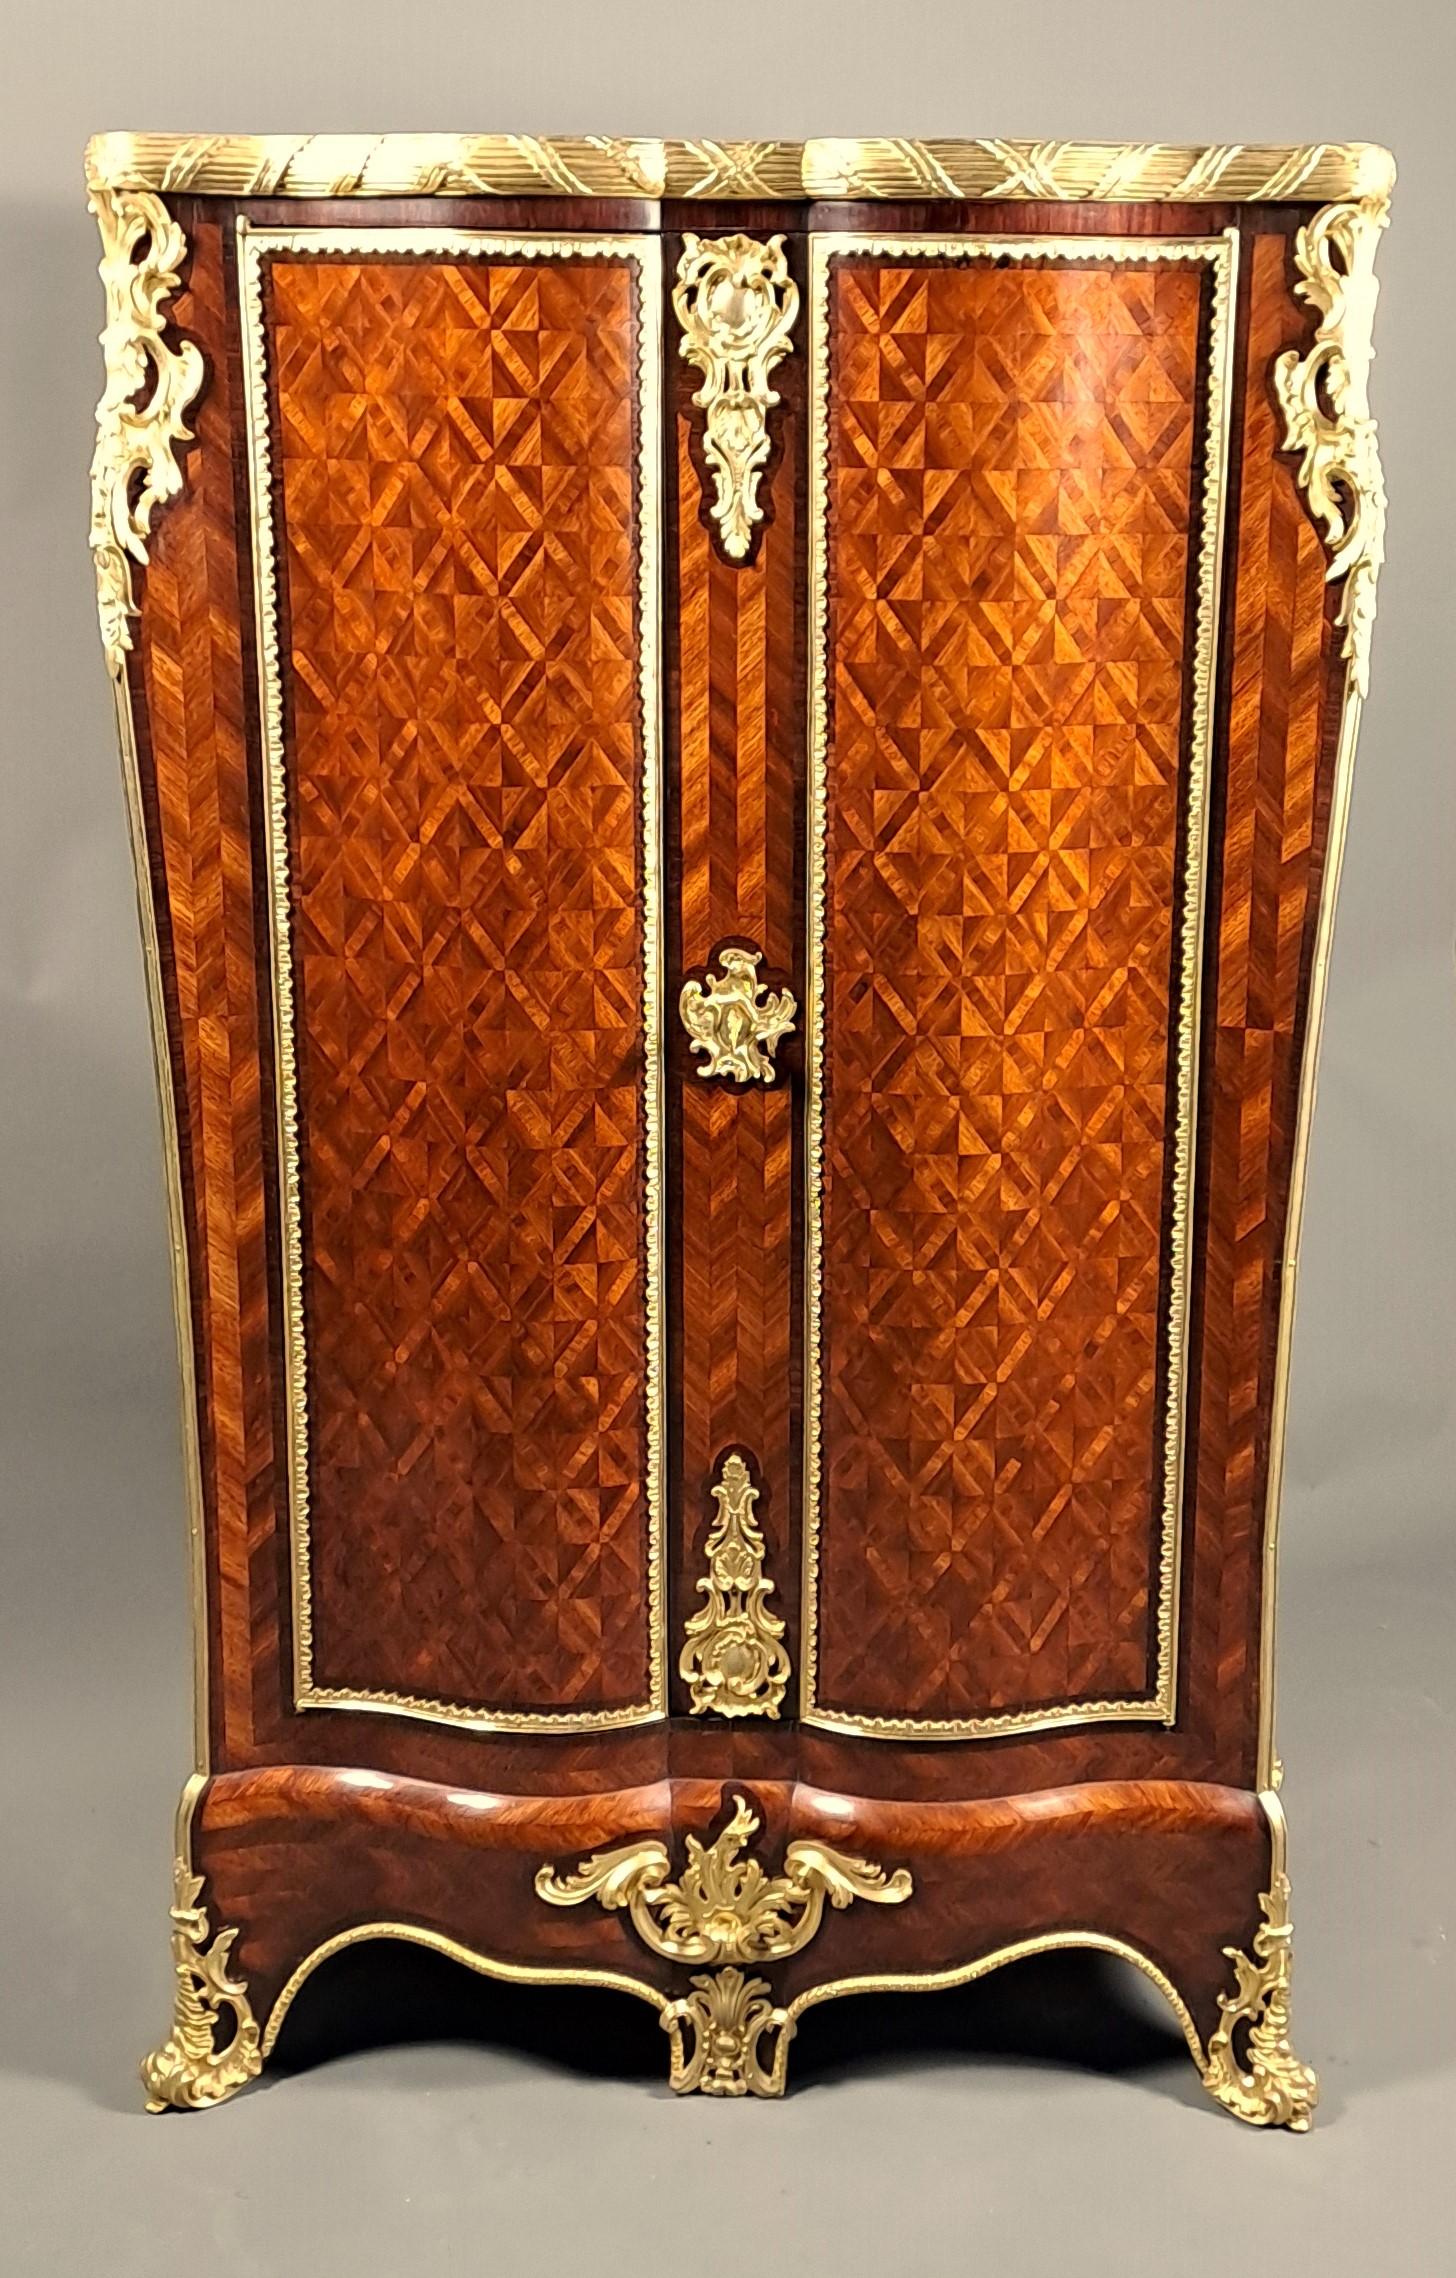 Gilt Important Cabinet Stamped Beurdeley In Paris